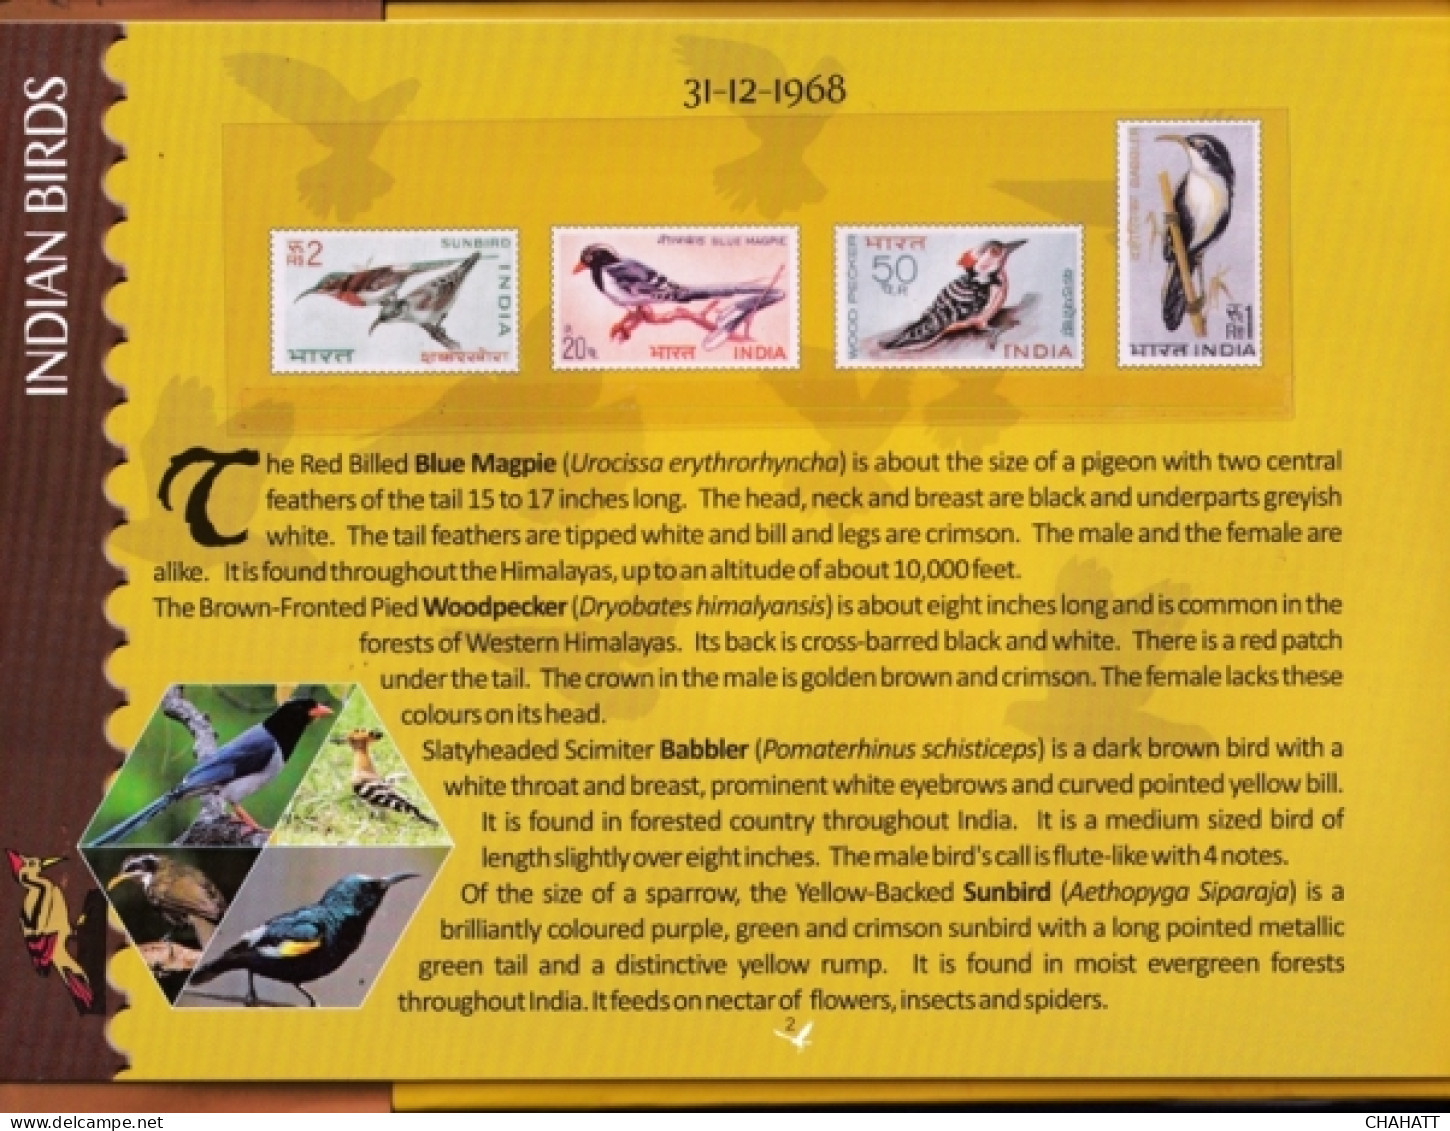 BIRDS OF INDIA- STAMP ALBUM- BEAUTIFULLY CURATED STAMP ALBUM WITH SPACE FOR STAMPS- ILLUSTRATED-BX4-36 - Fauna